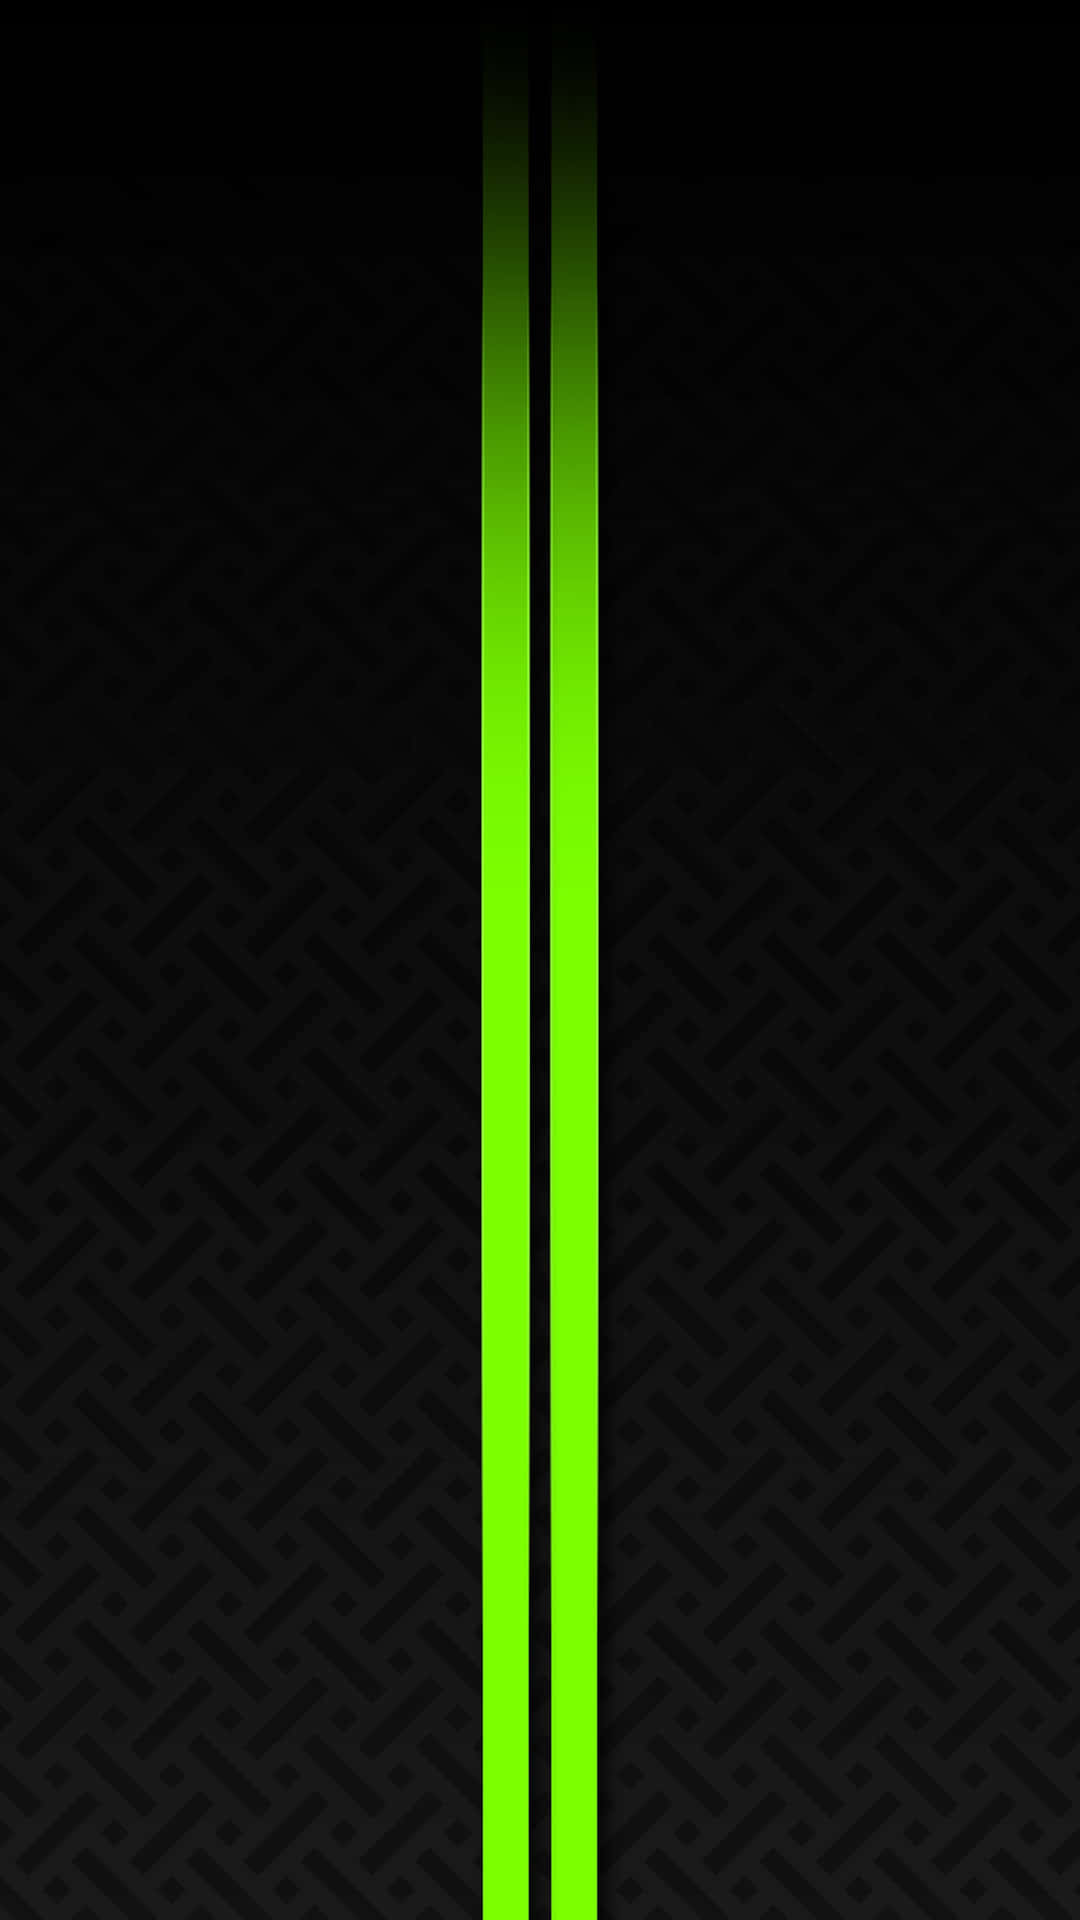 Download A Green Neon Line On A Black Background Wallpaper | Wallpapers.com